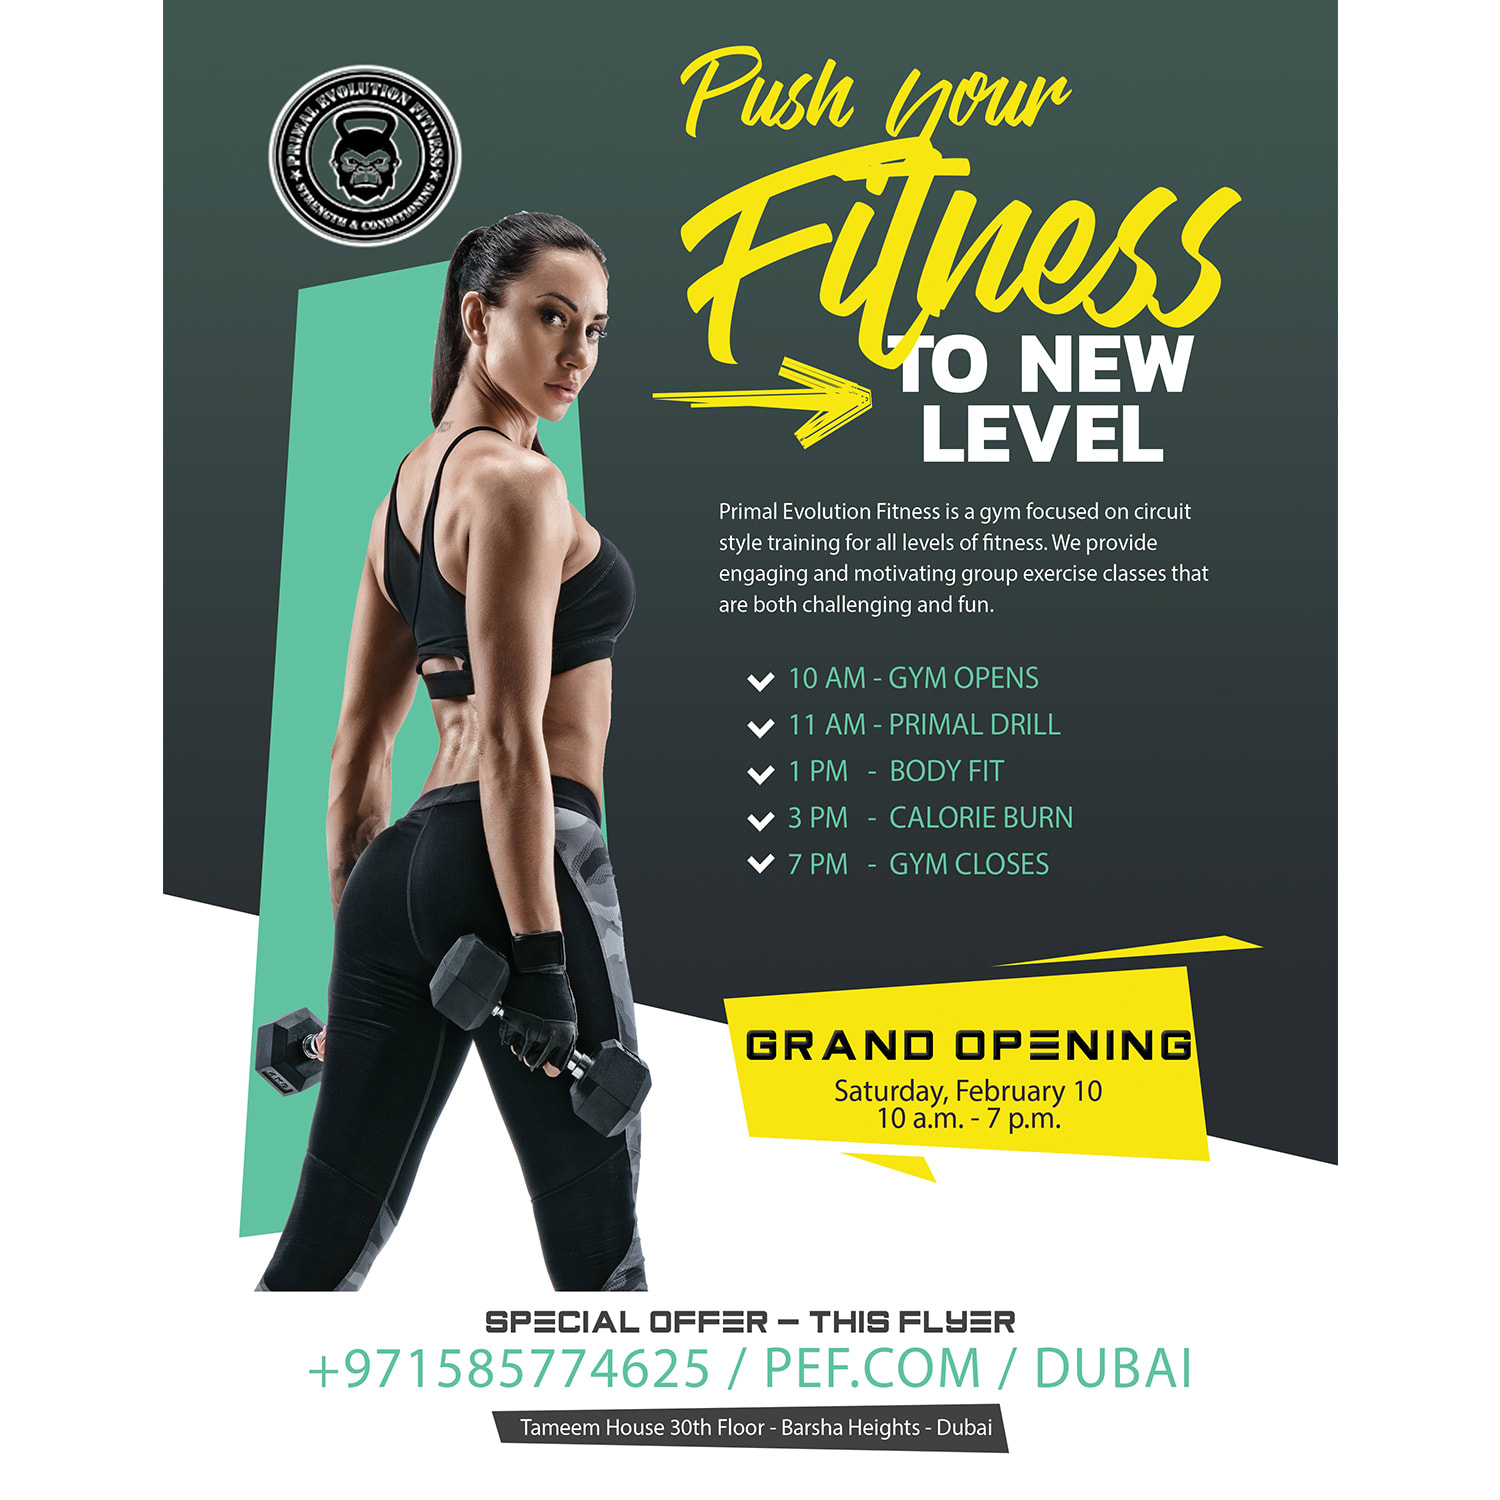 Design A Professional Fitness Flyer By Baberali5566